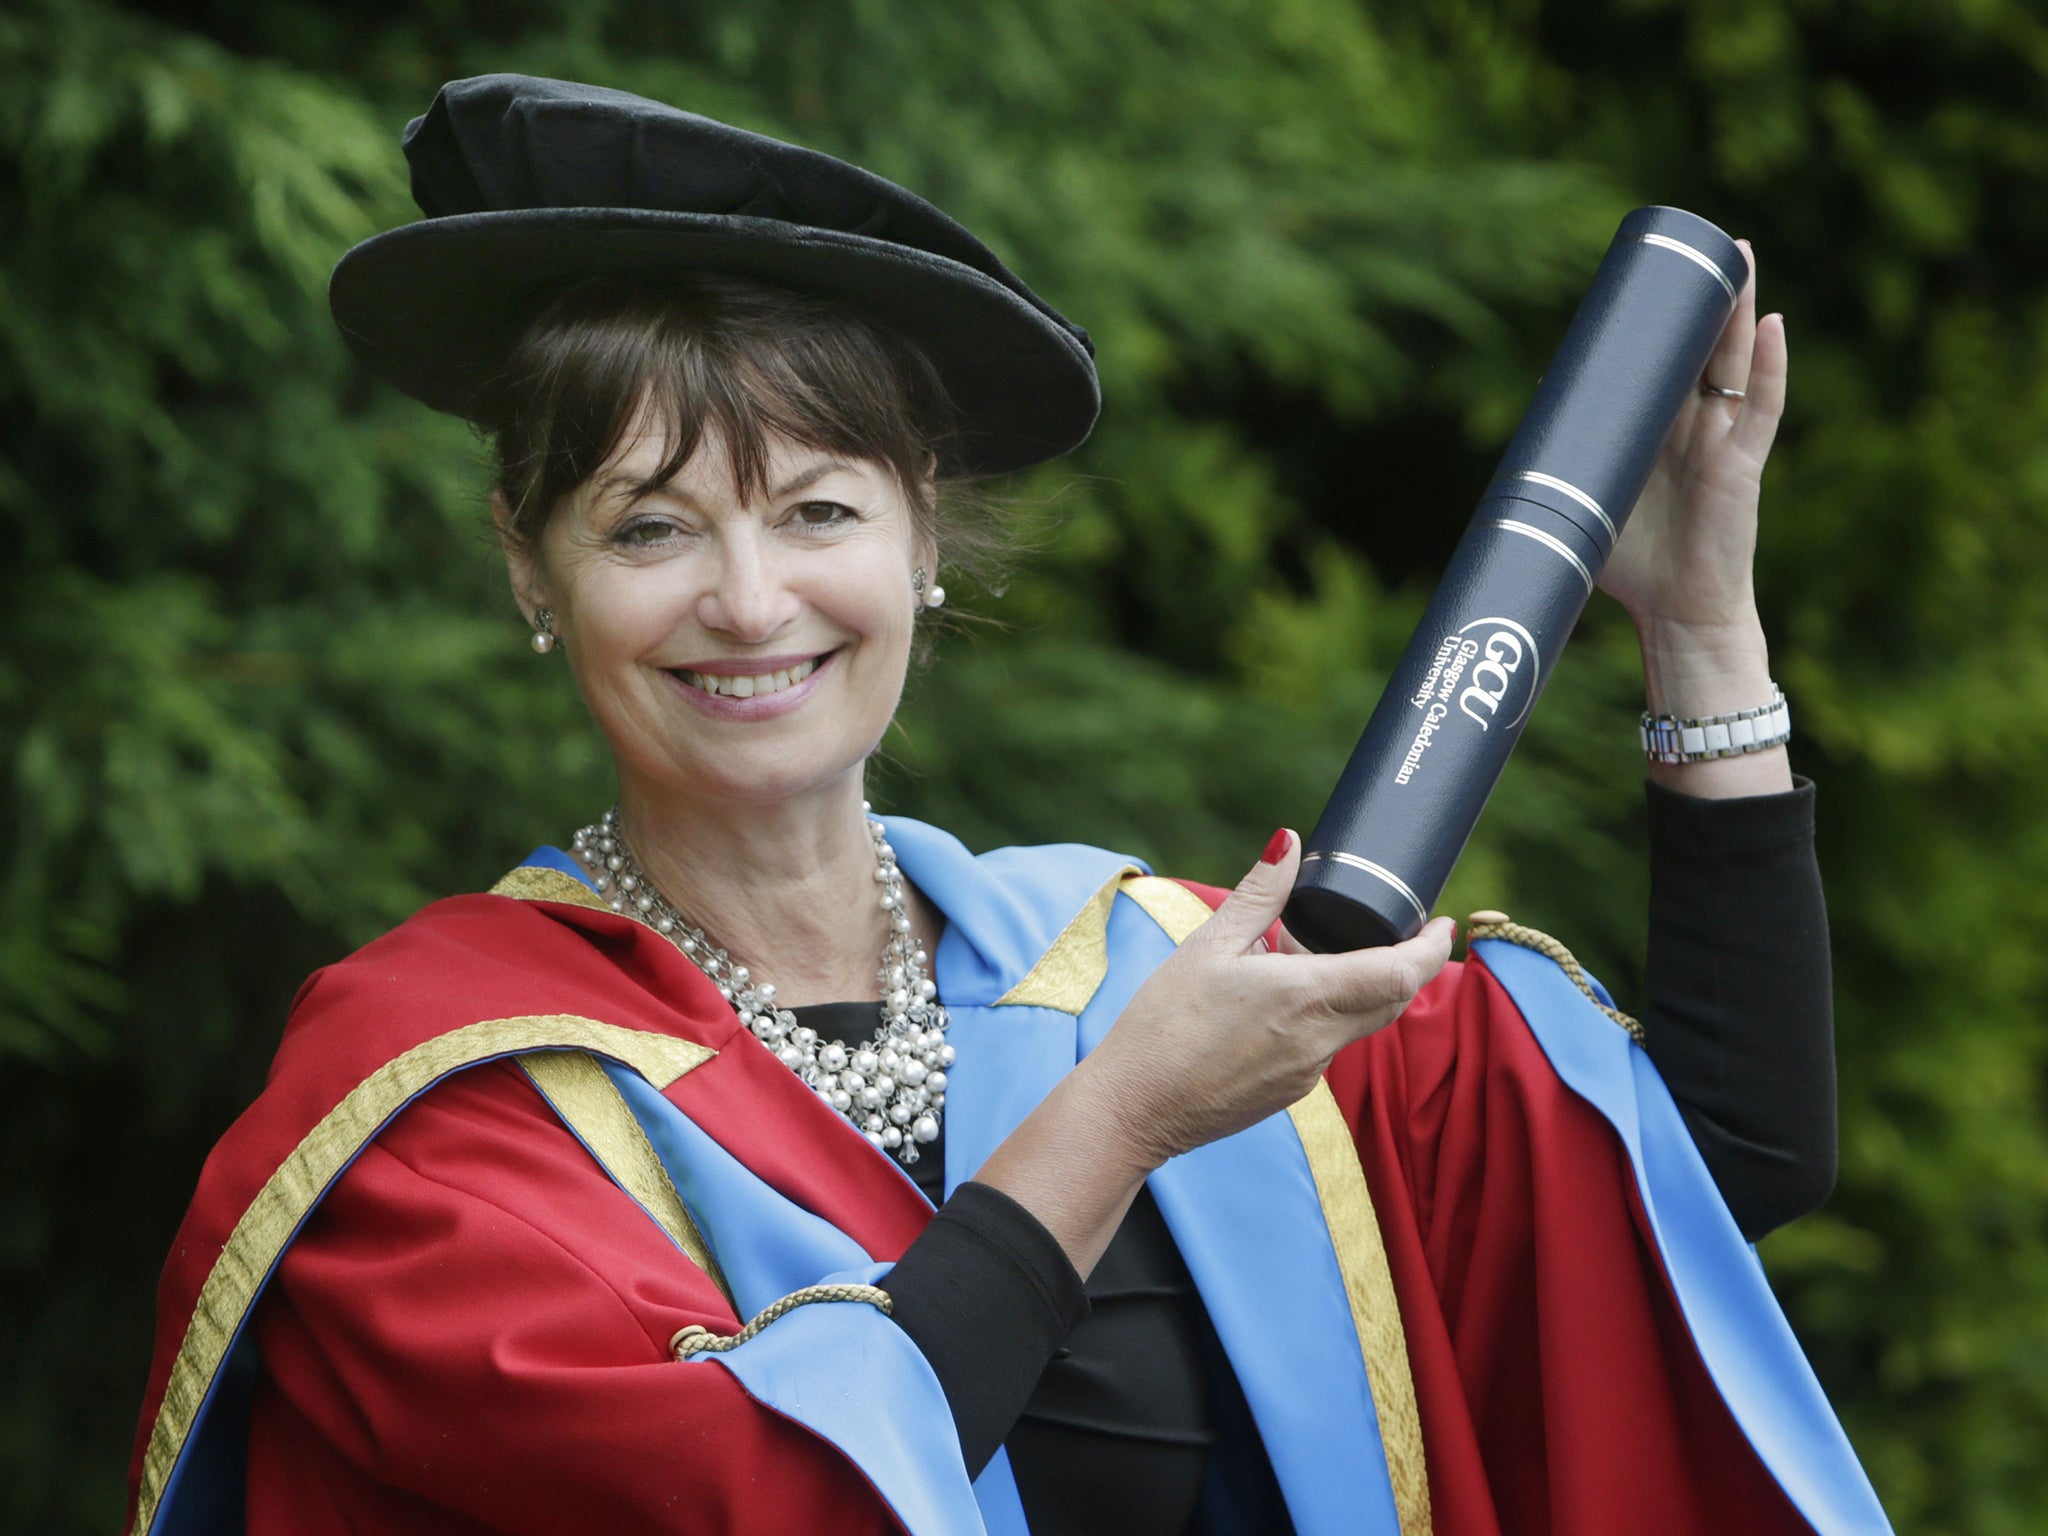 Professor Anne Glover, with her honorary degree from Caledonian University, said her EC
role had been difficult since day one